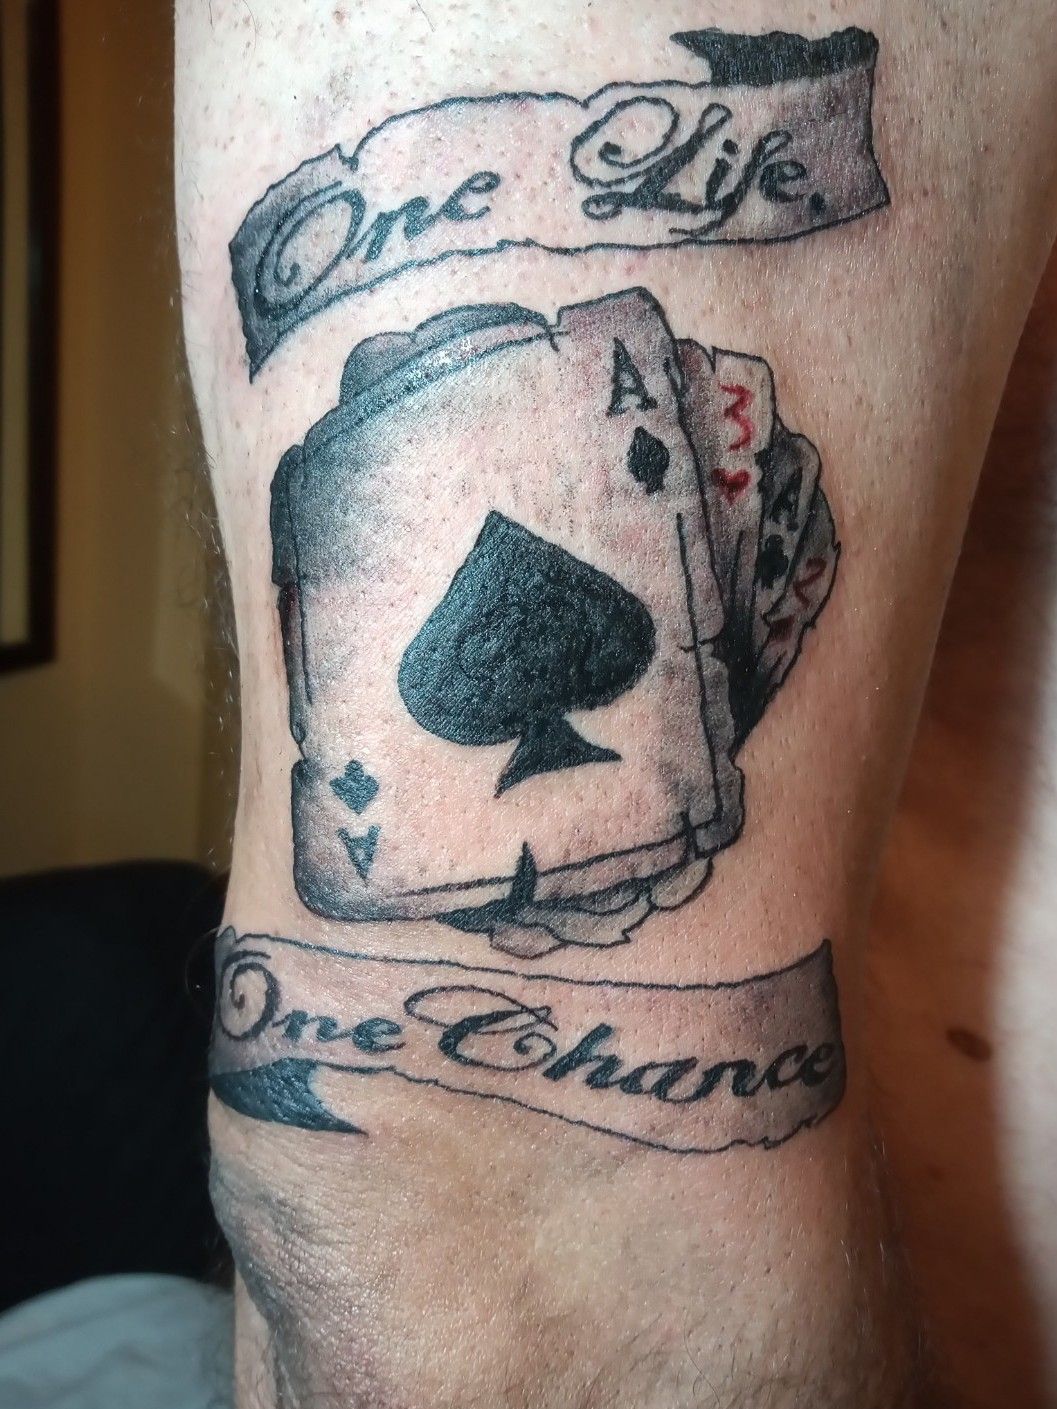 CRAZY ARTS  One life one chance Tattoo   2019 By  Facebook